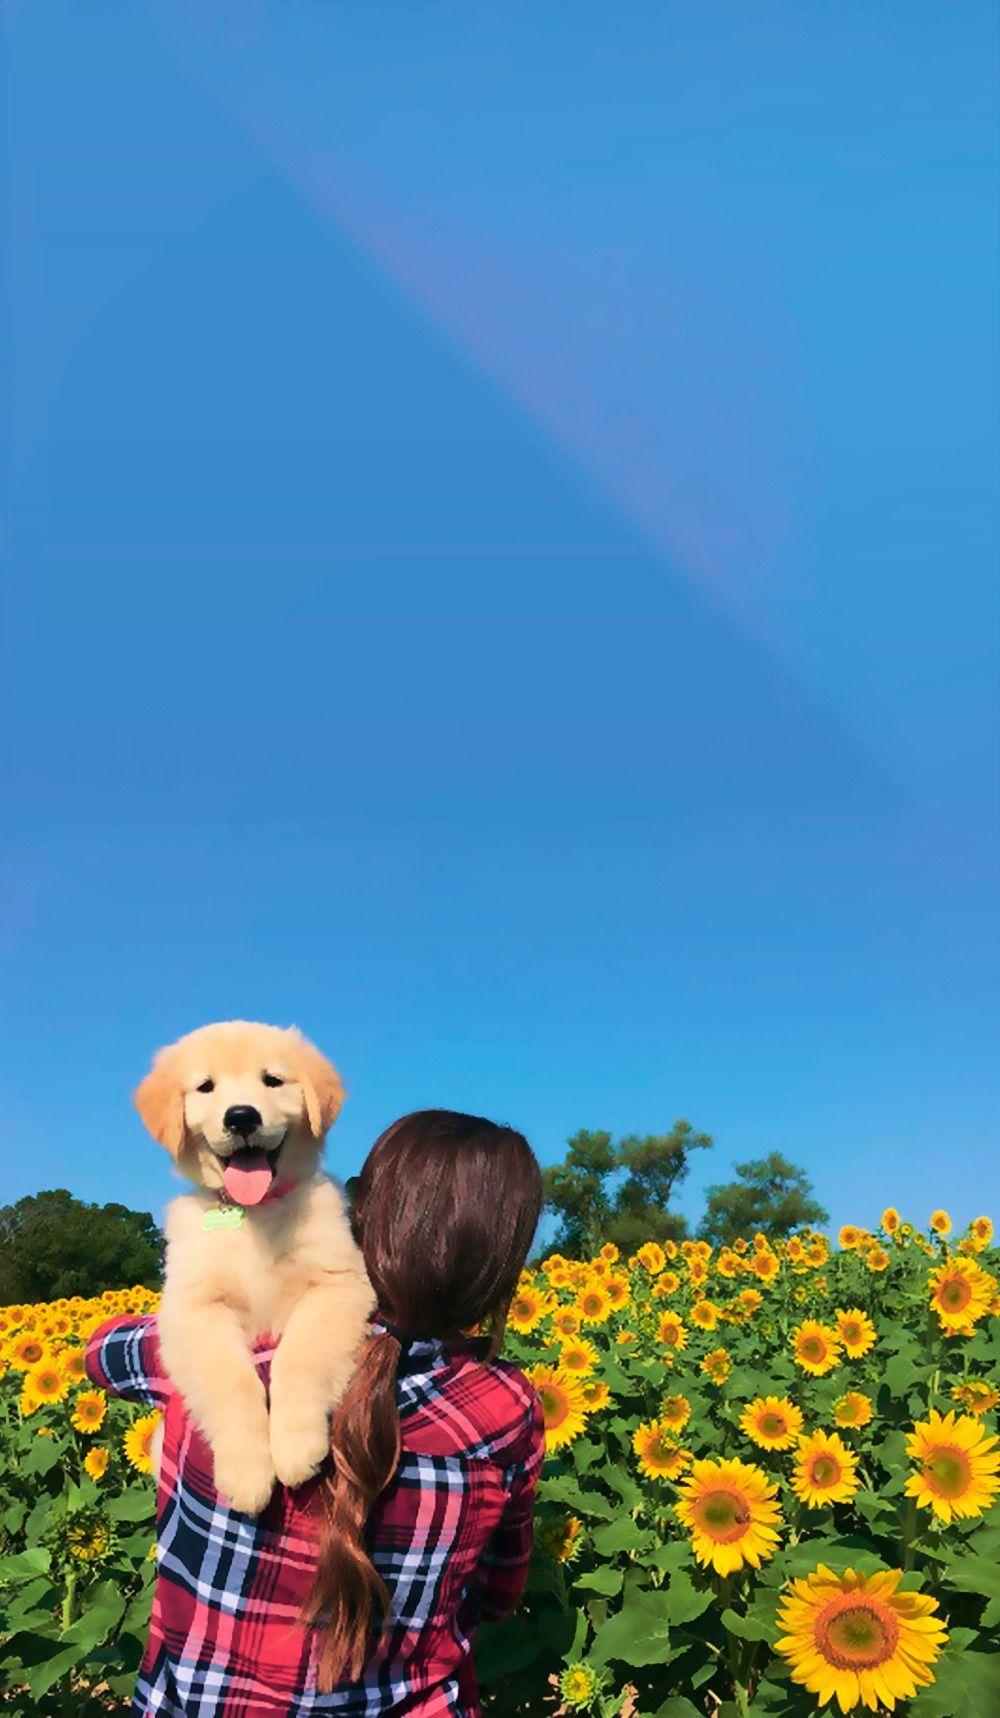 6 cute dog iphone wallpapers for dog lovers Dog love wallpaper for phone